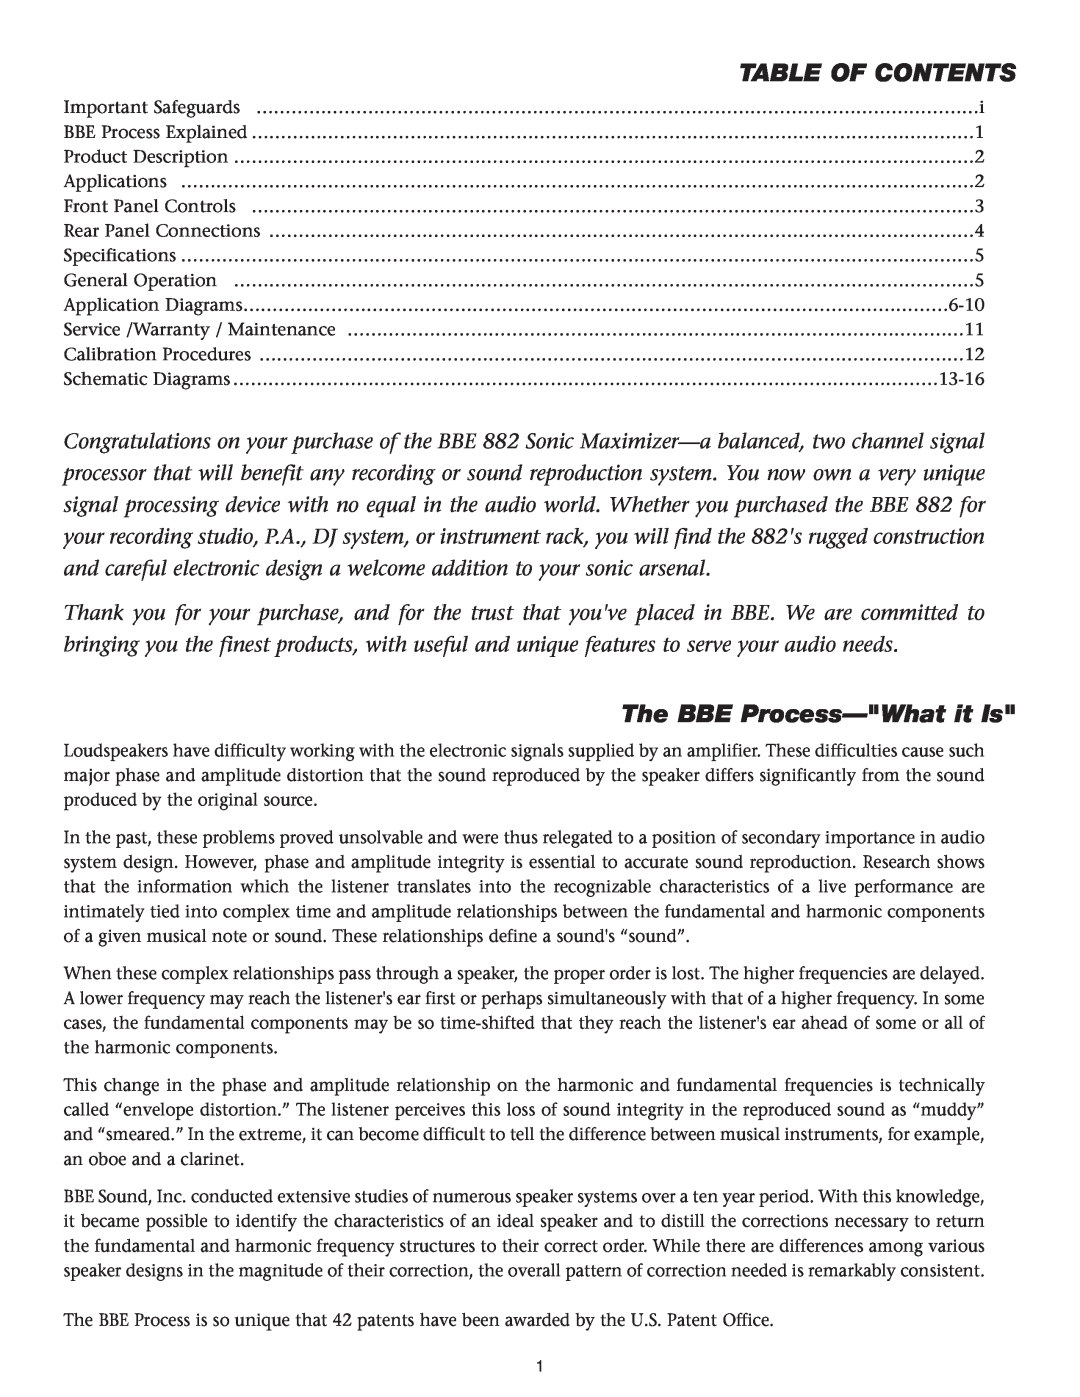 BBE BBE 882 manual Table Of Contents, The BBE Process-Whatit Is 